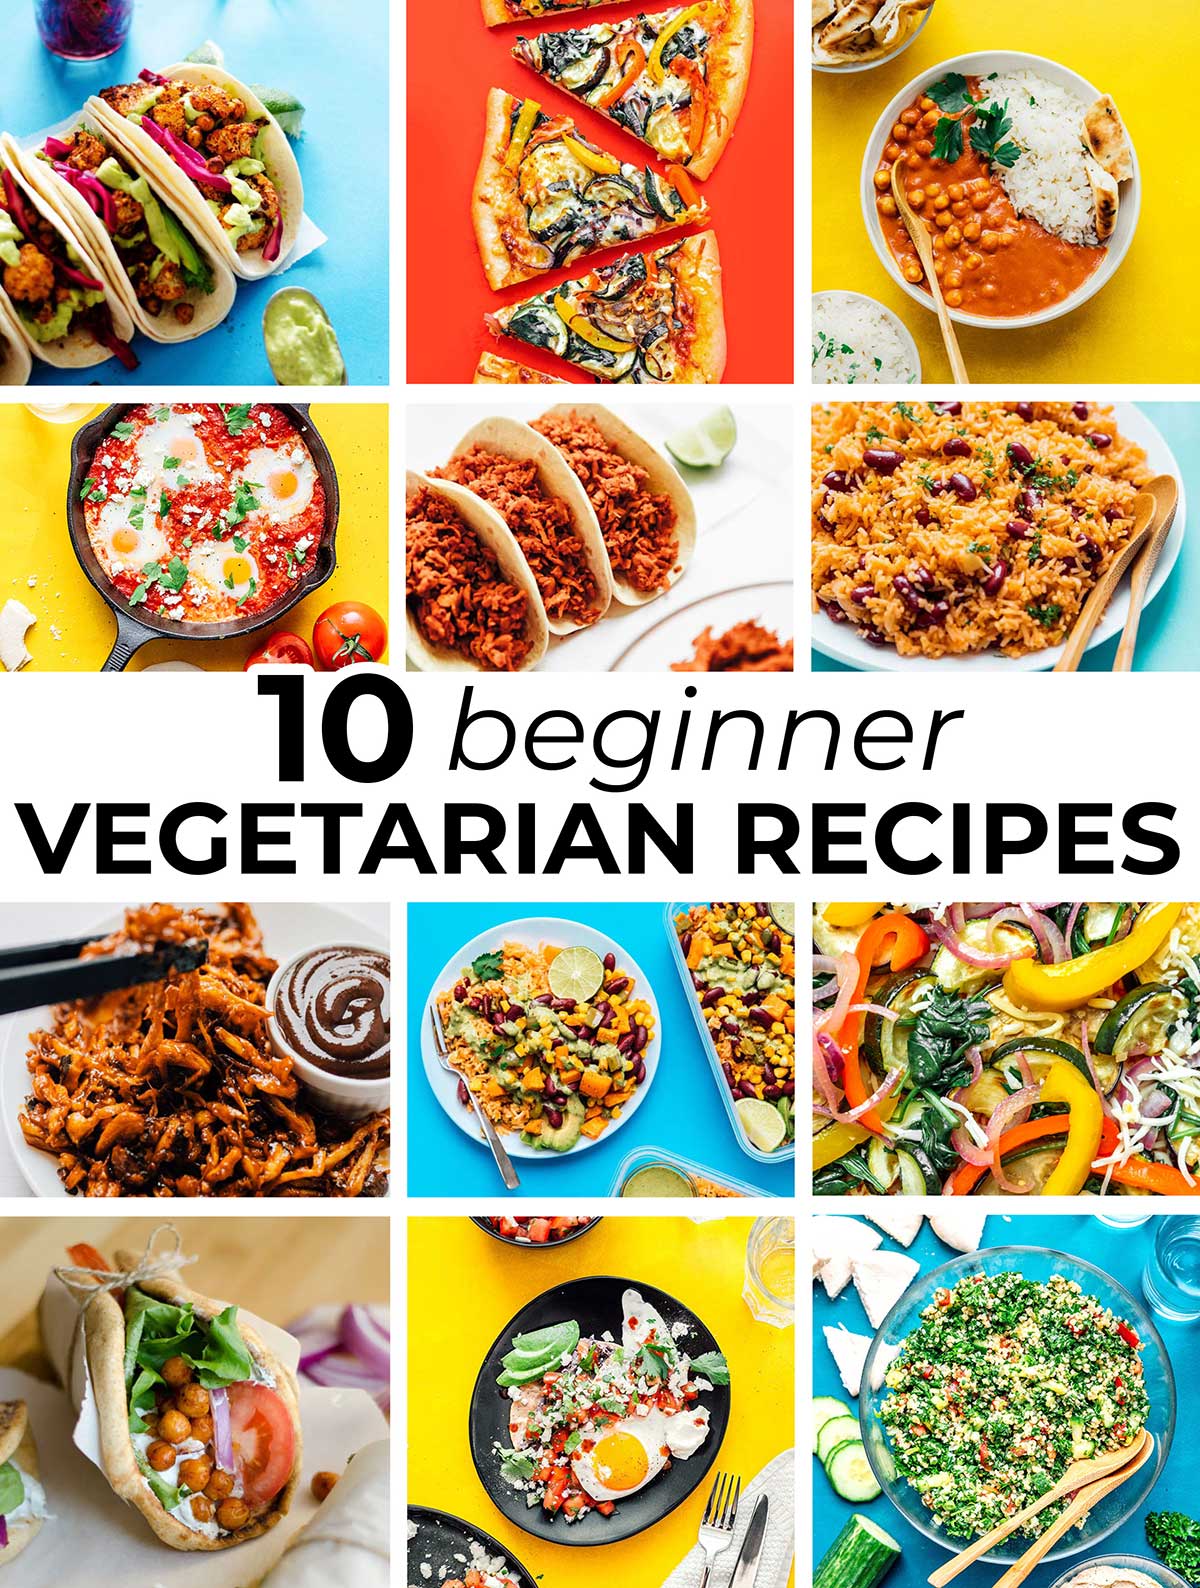 10 Vegetarian Recipes For Beginners (Easy + Fast) 💪 | Live Eat Learn